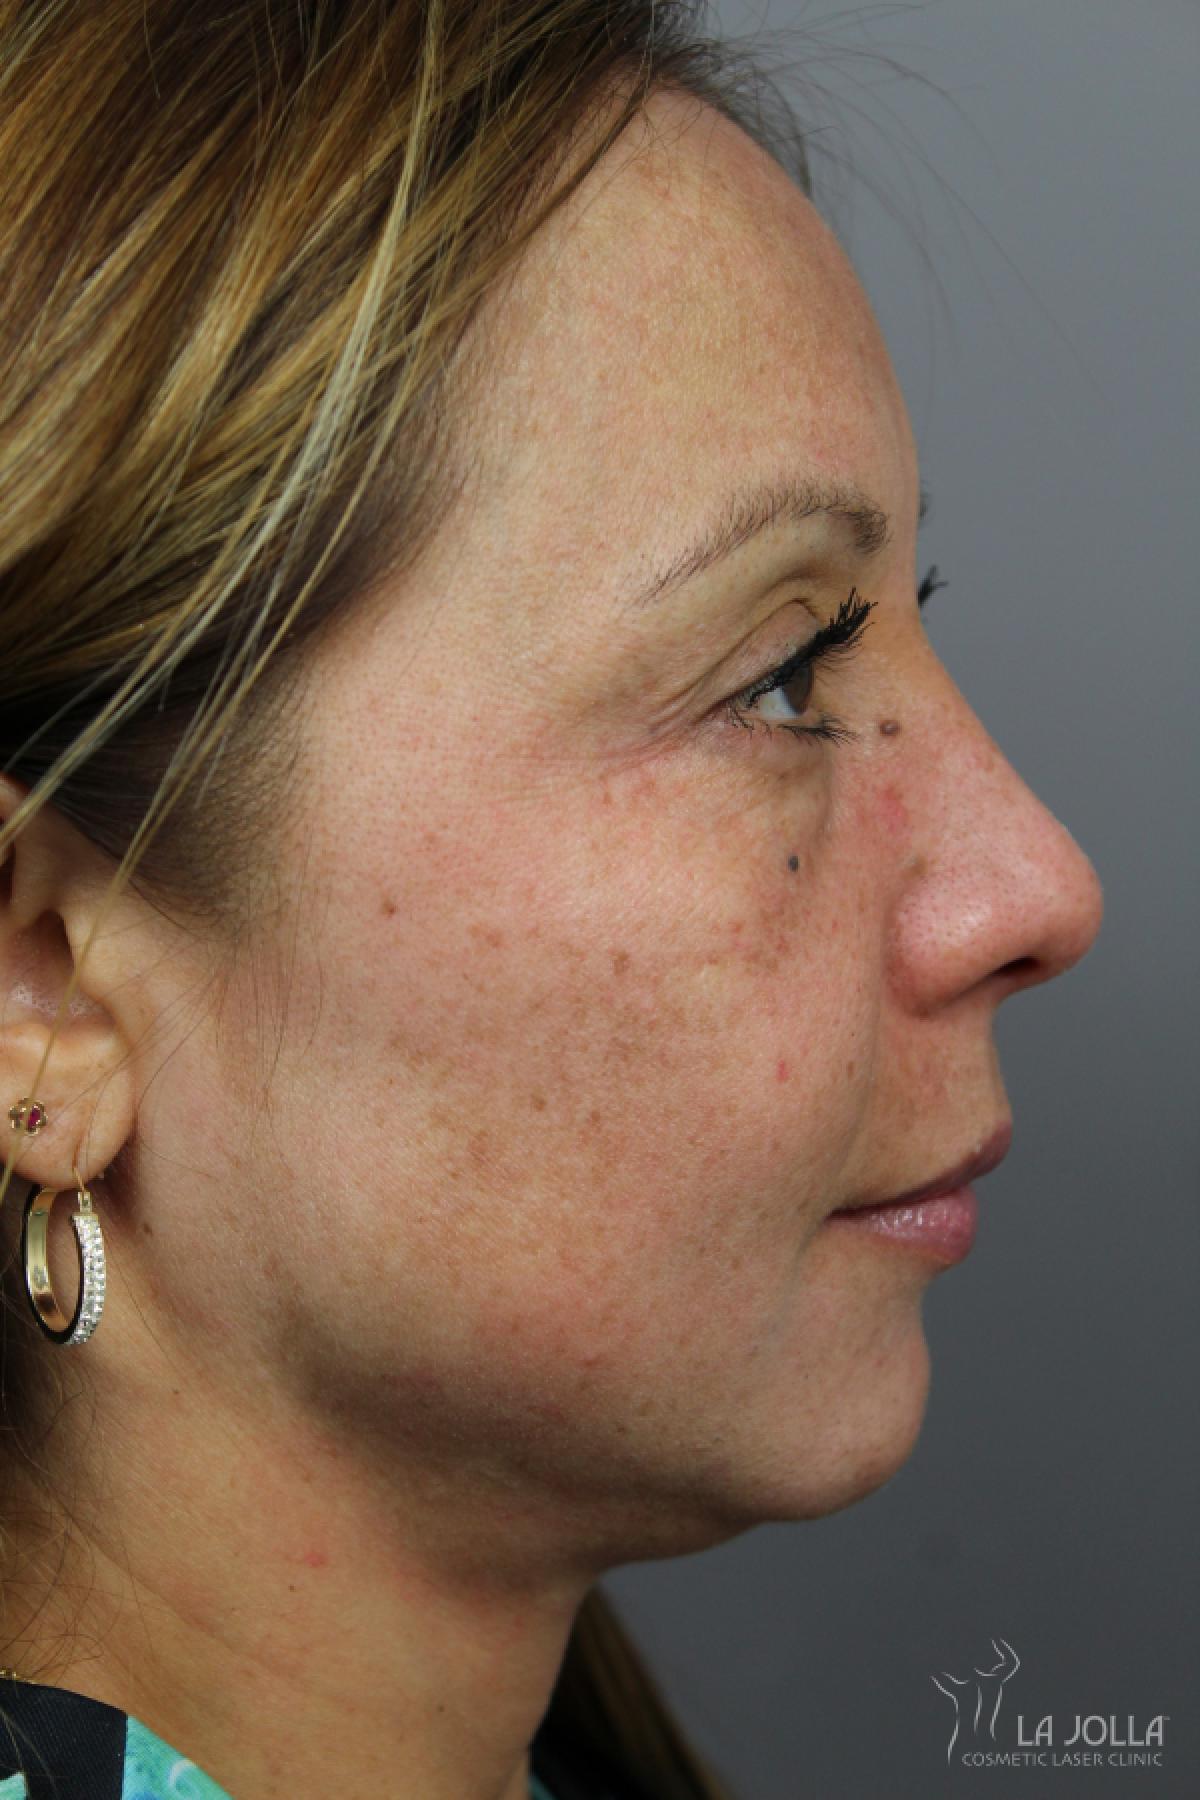 Skin Care Products: Patient 1 - After 1